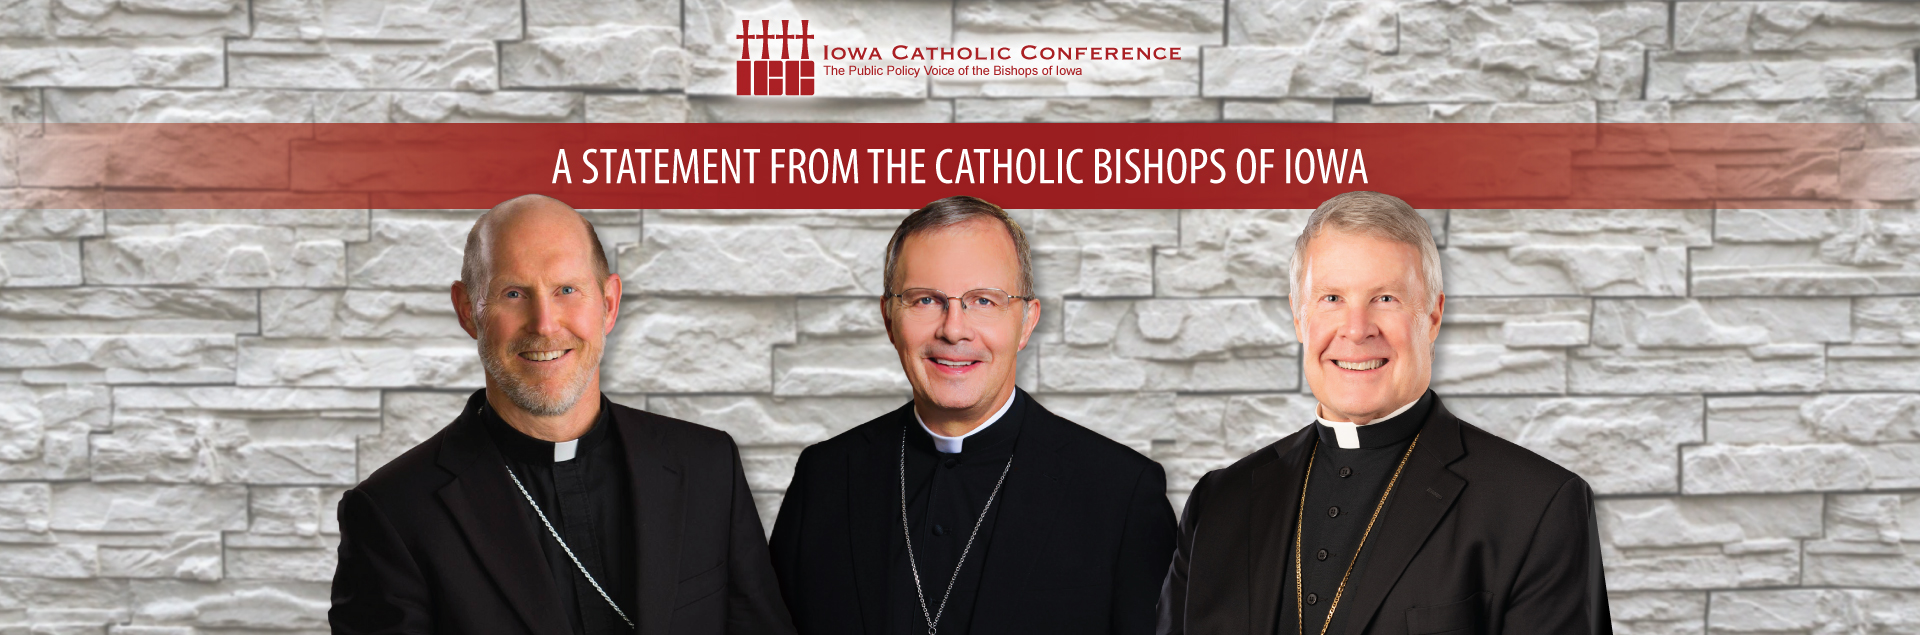 A statement from the Catholic bishops of Iowa, showing 